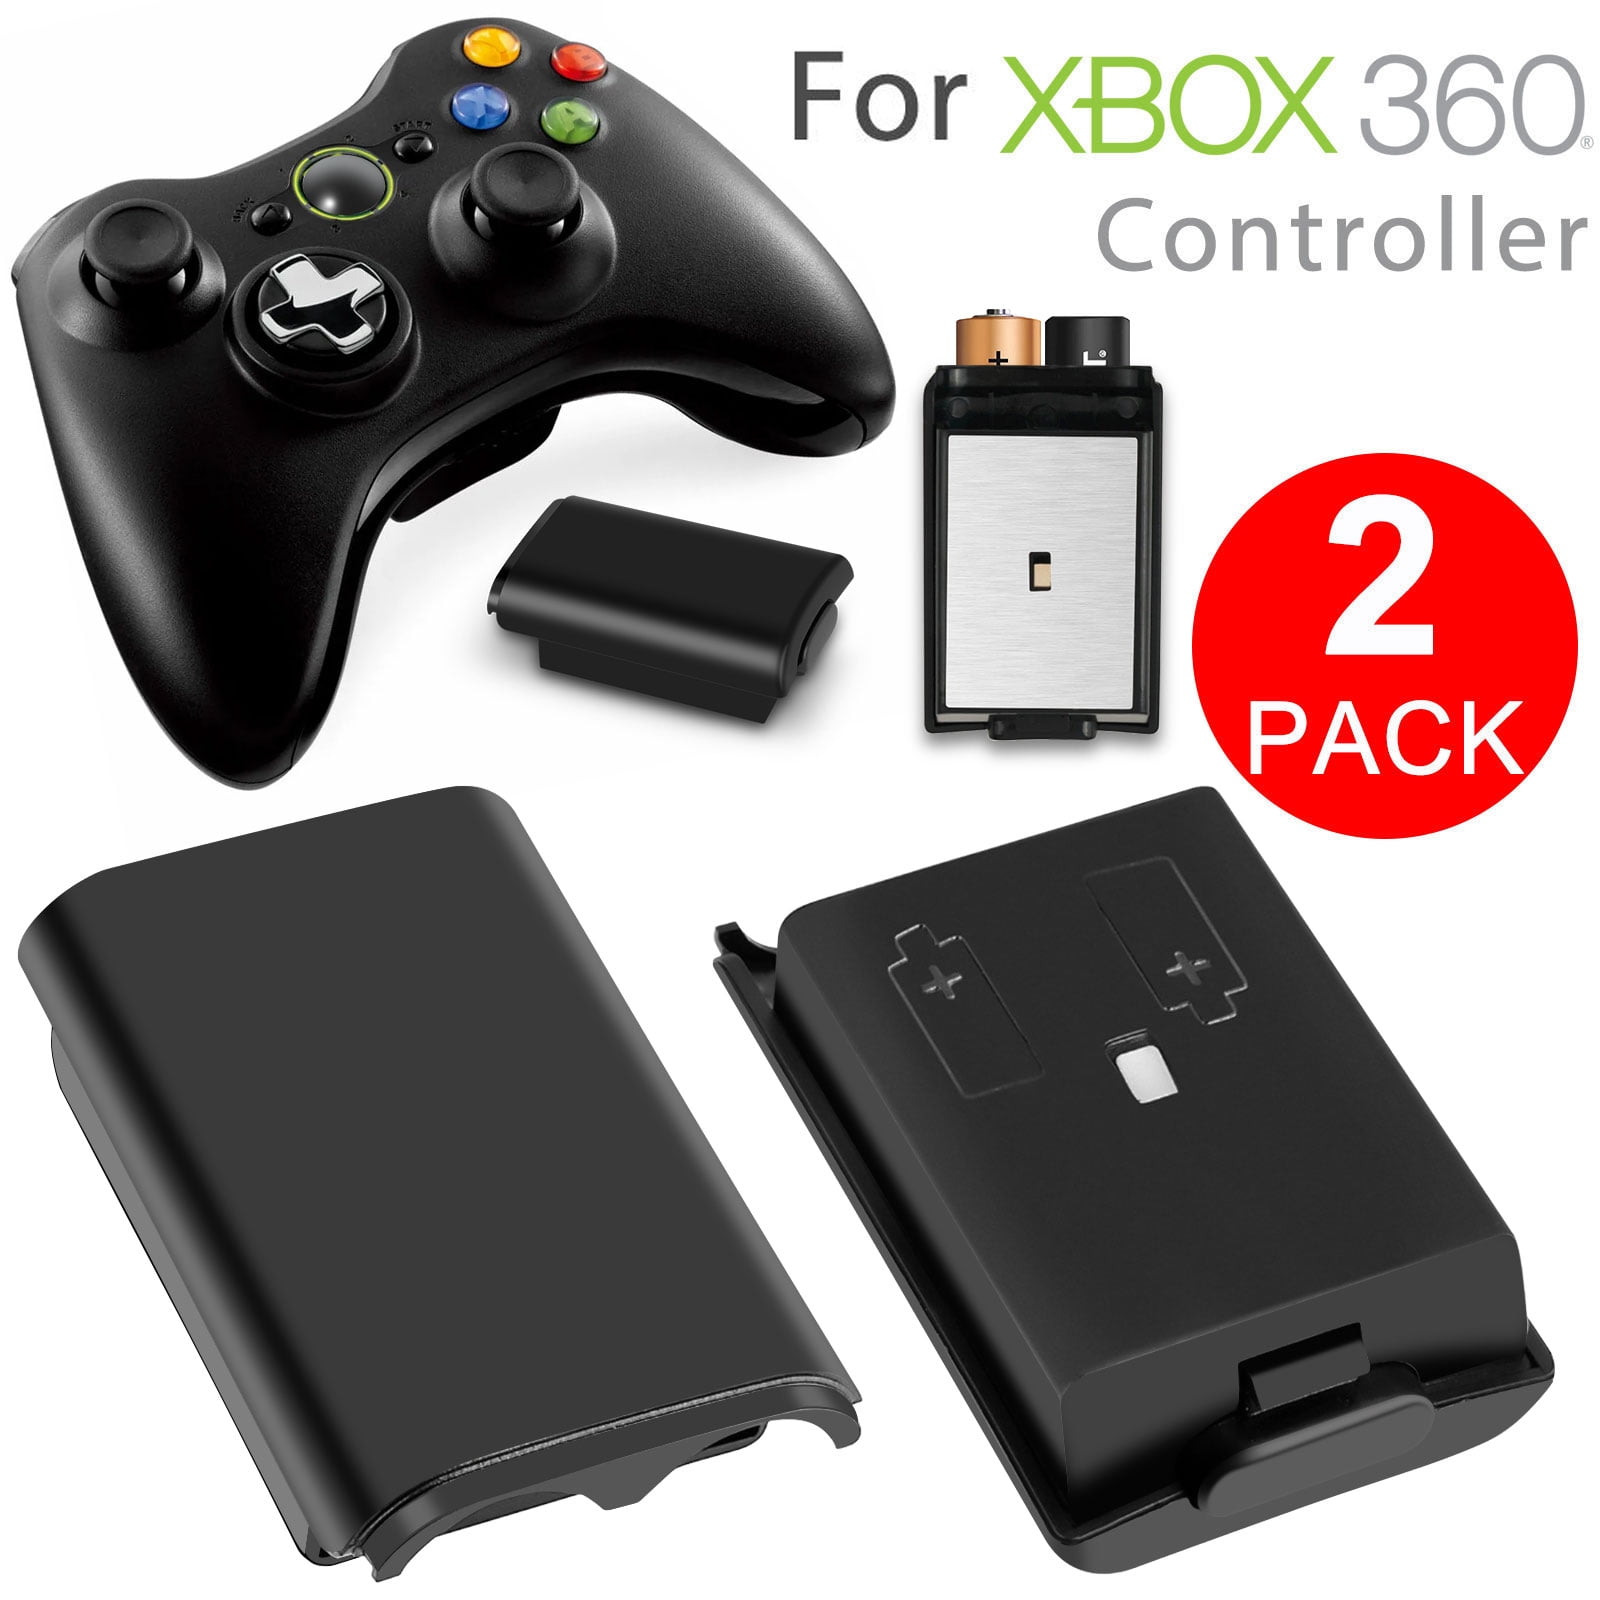 DF-FR Universal Battery Pack Cover Shell Shield Case Kit for Xbox 360 Wireless Controller Black Battery Cover Shell Color: Black